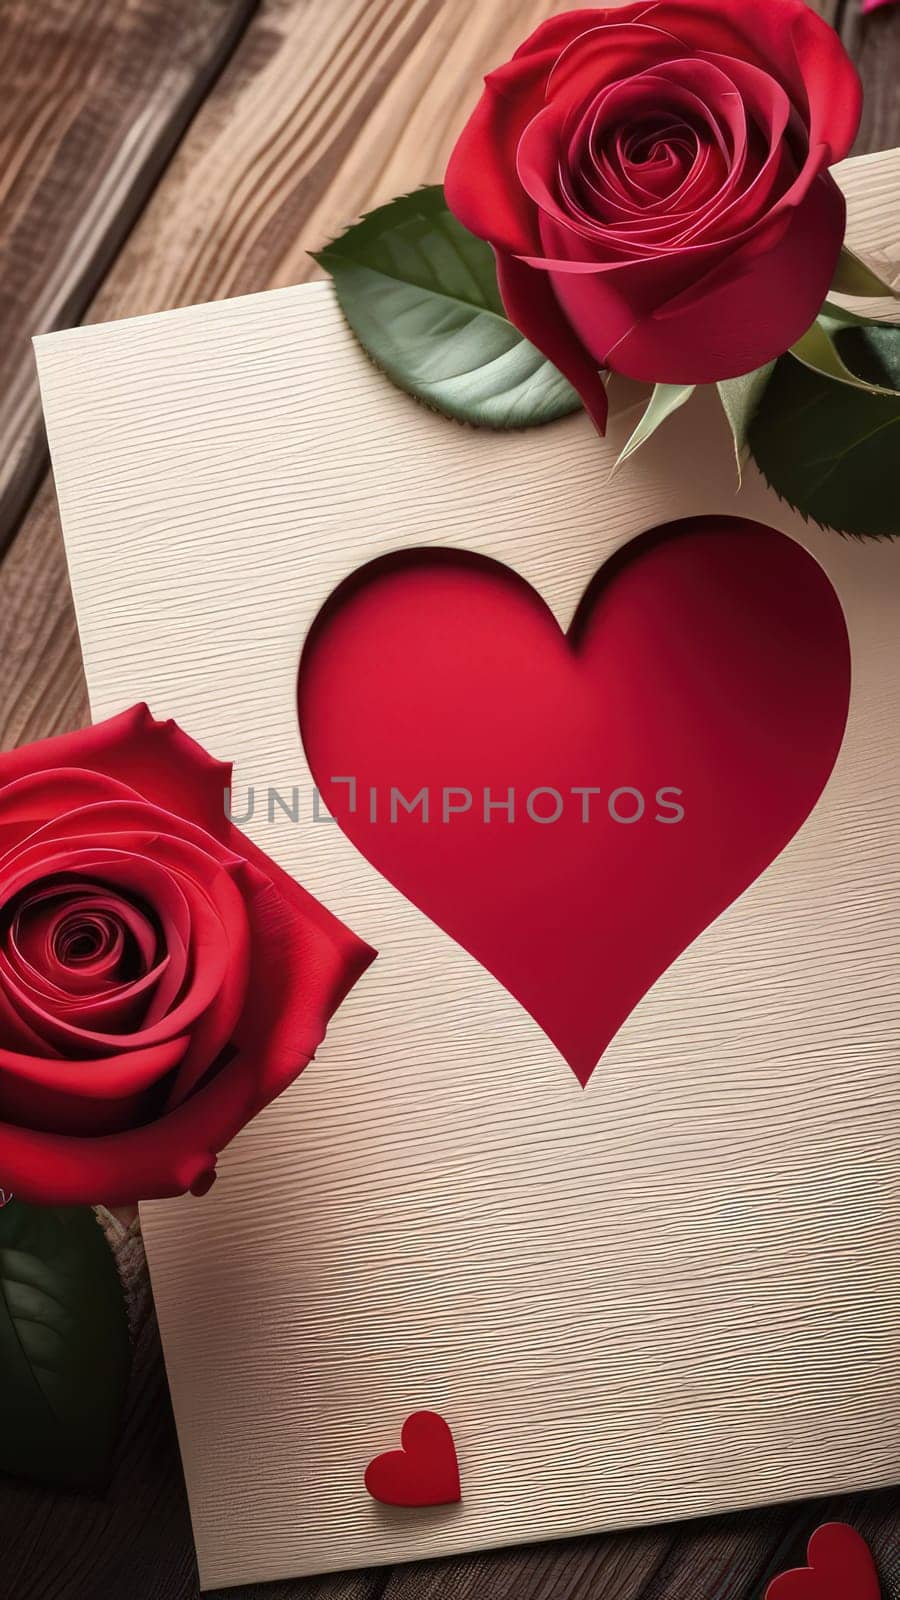 St. Valentines day, wedding vertical banner with abstract illustrated red heart, roses on wood background. Use for cute love sale banners, print, vouchers or greeting cards. Concept love, copy space